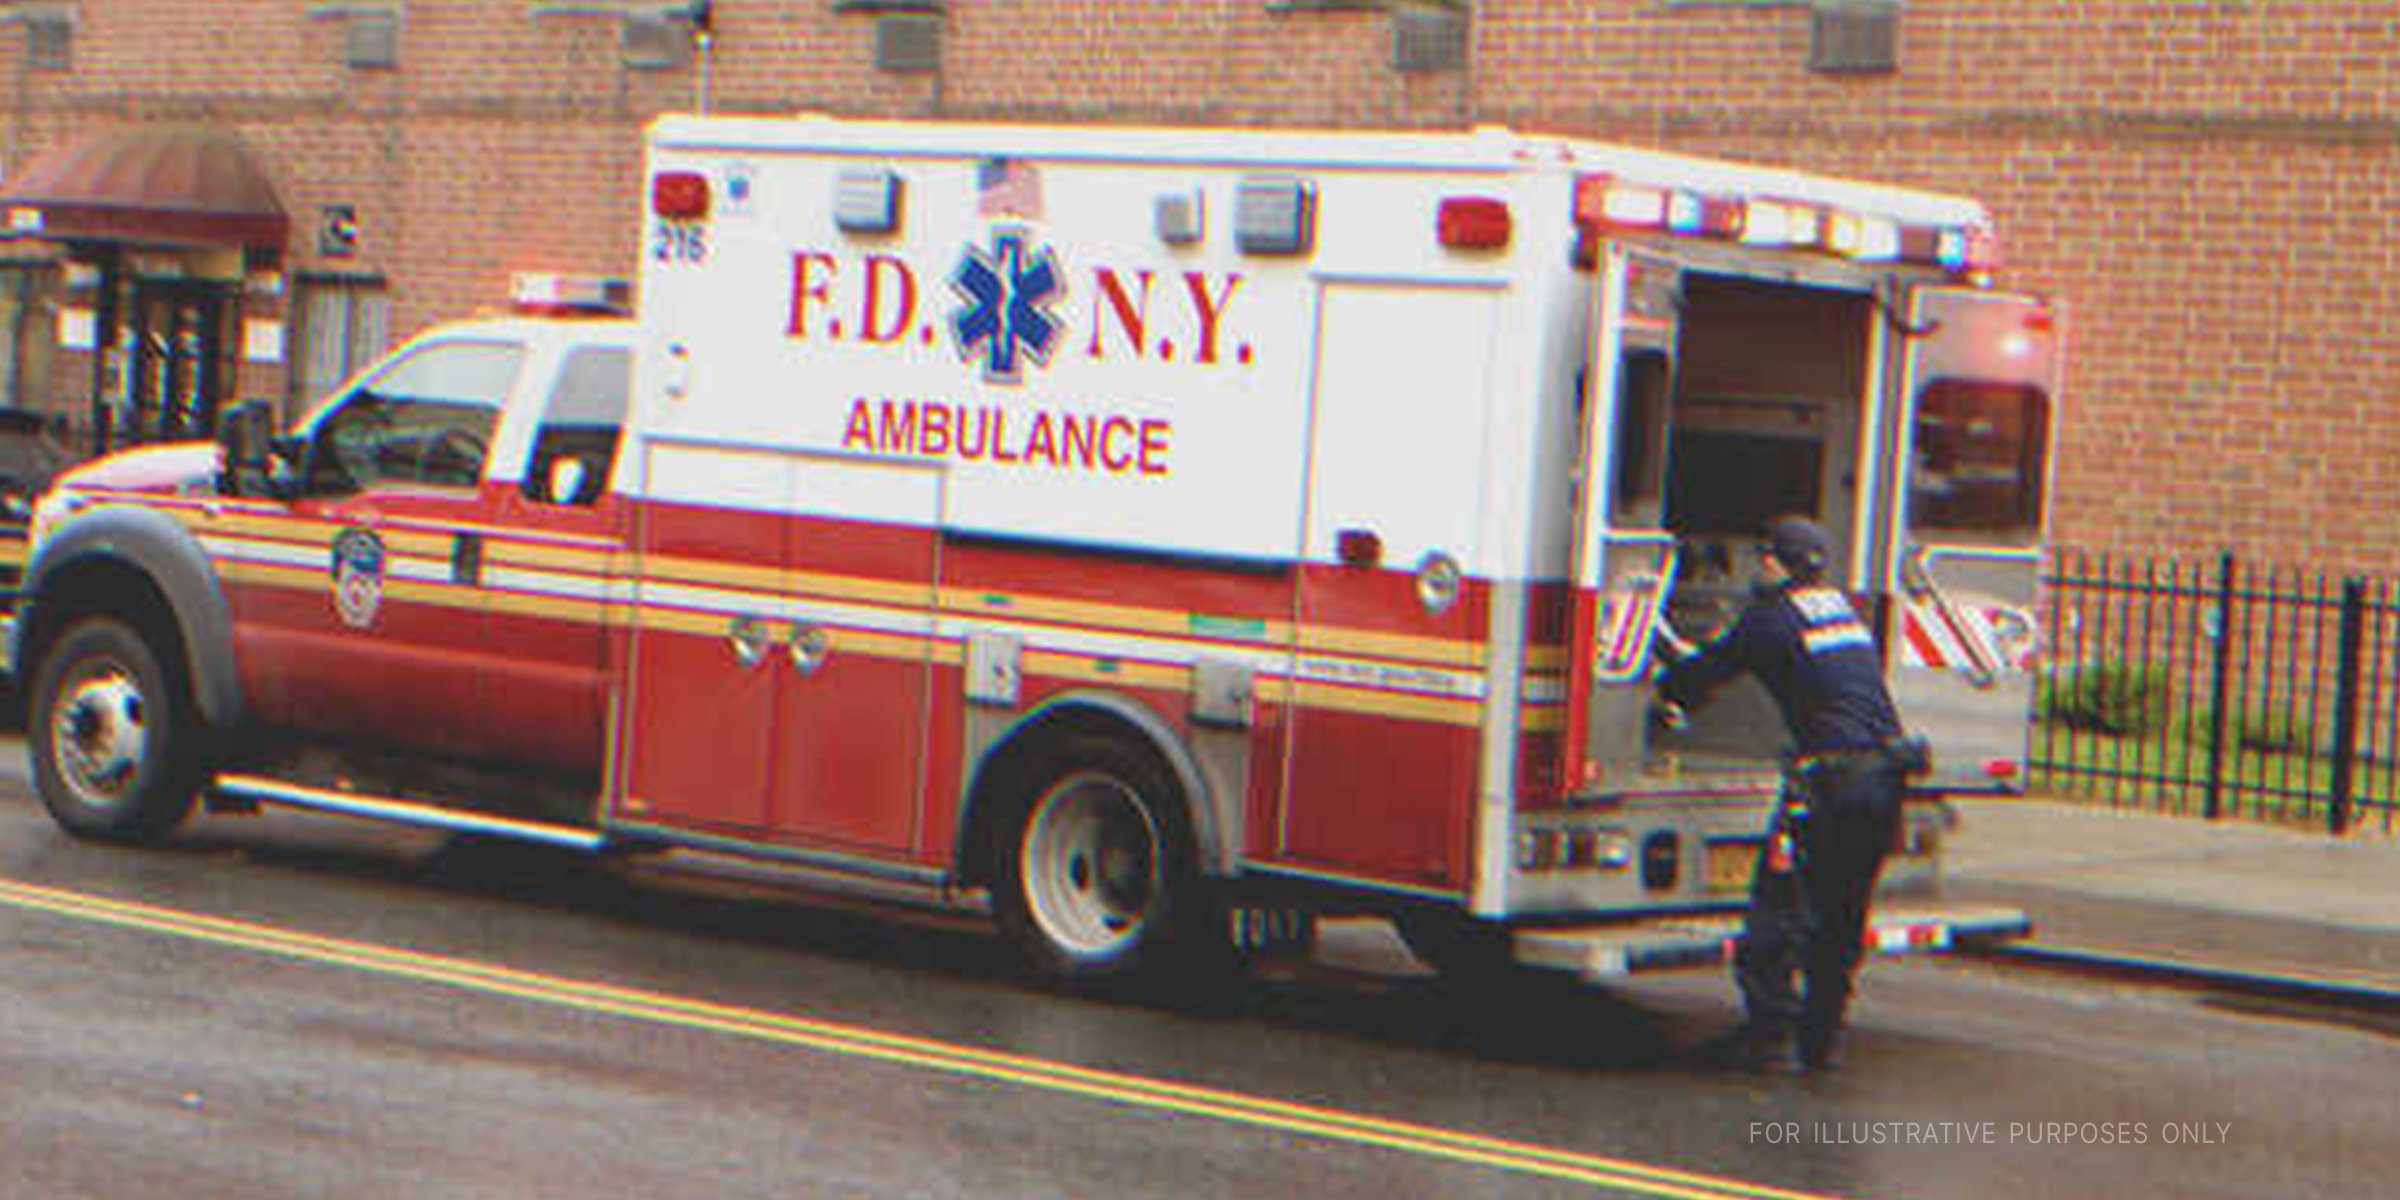 An ambulance arrives at the scene | Source: Shutterstock